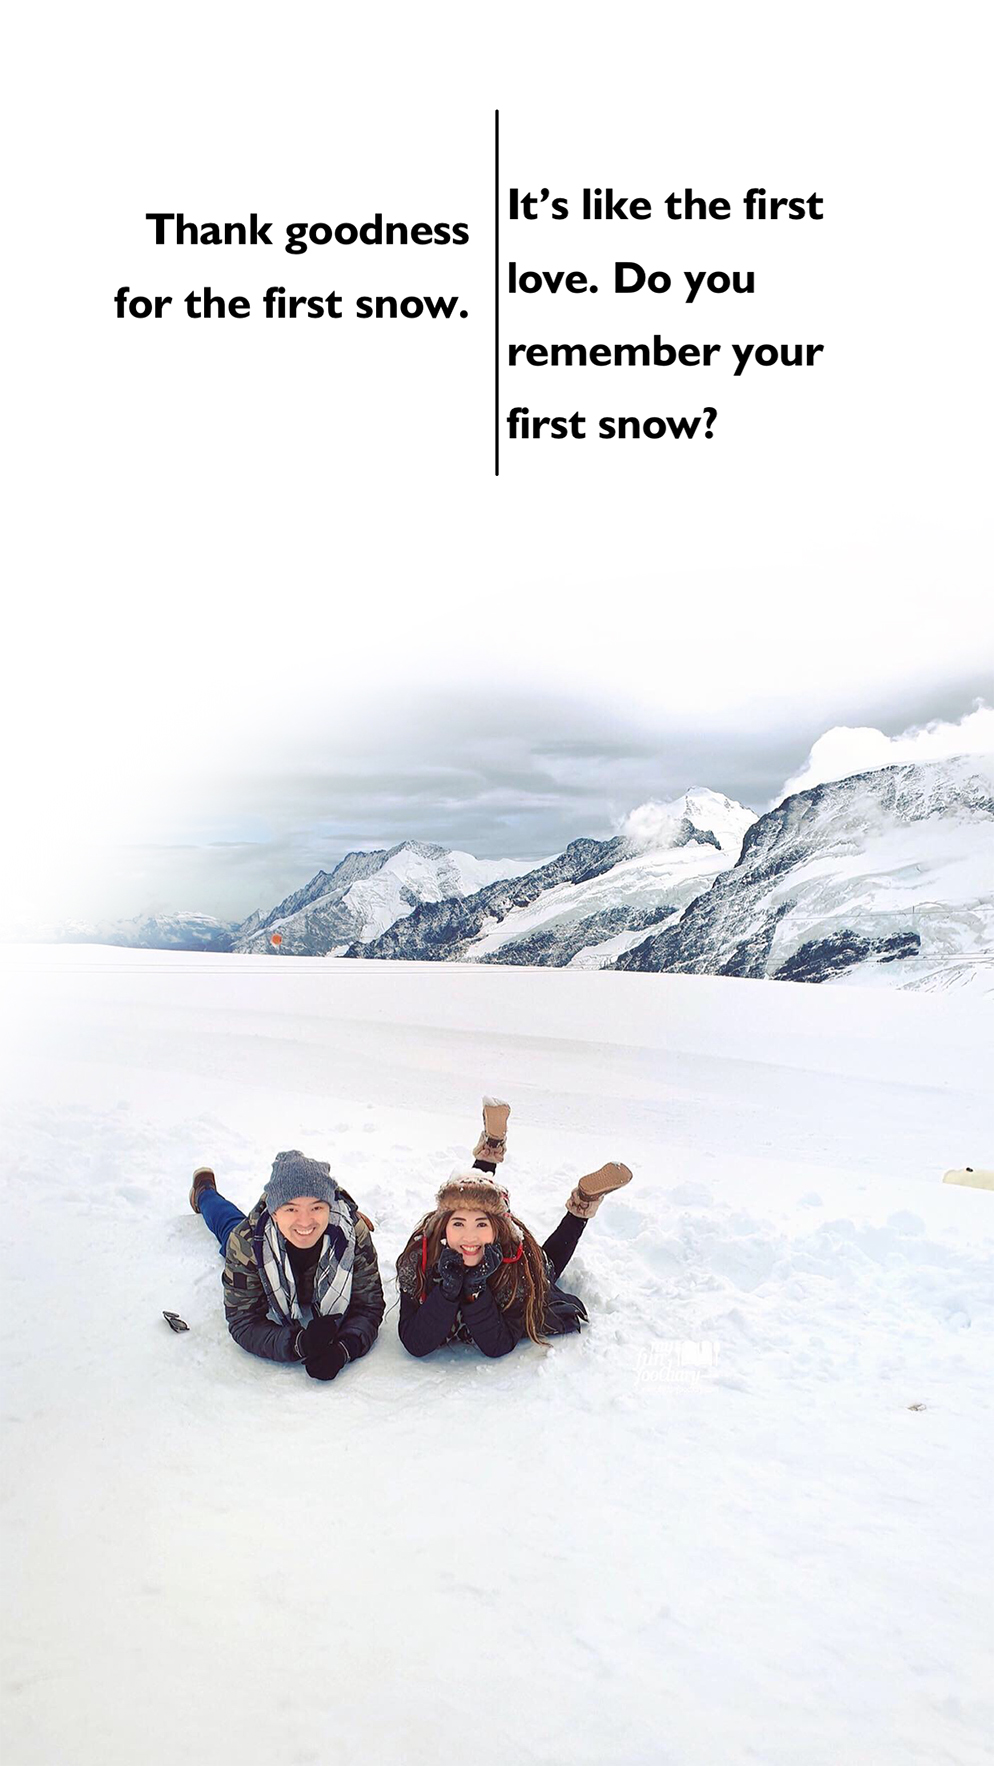 Our first snow experience in Jungfrau Top of Europe - Travel 3 Weeks Itinerary Europe by Myfunfoodiary